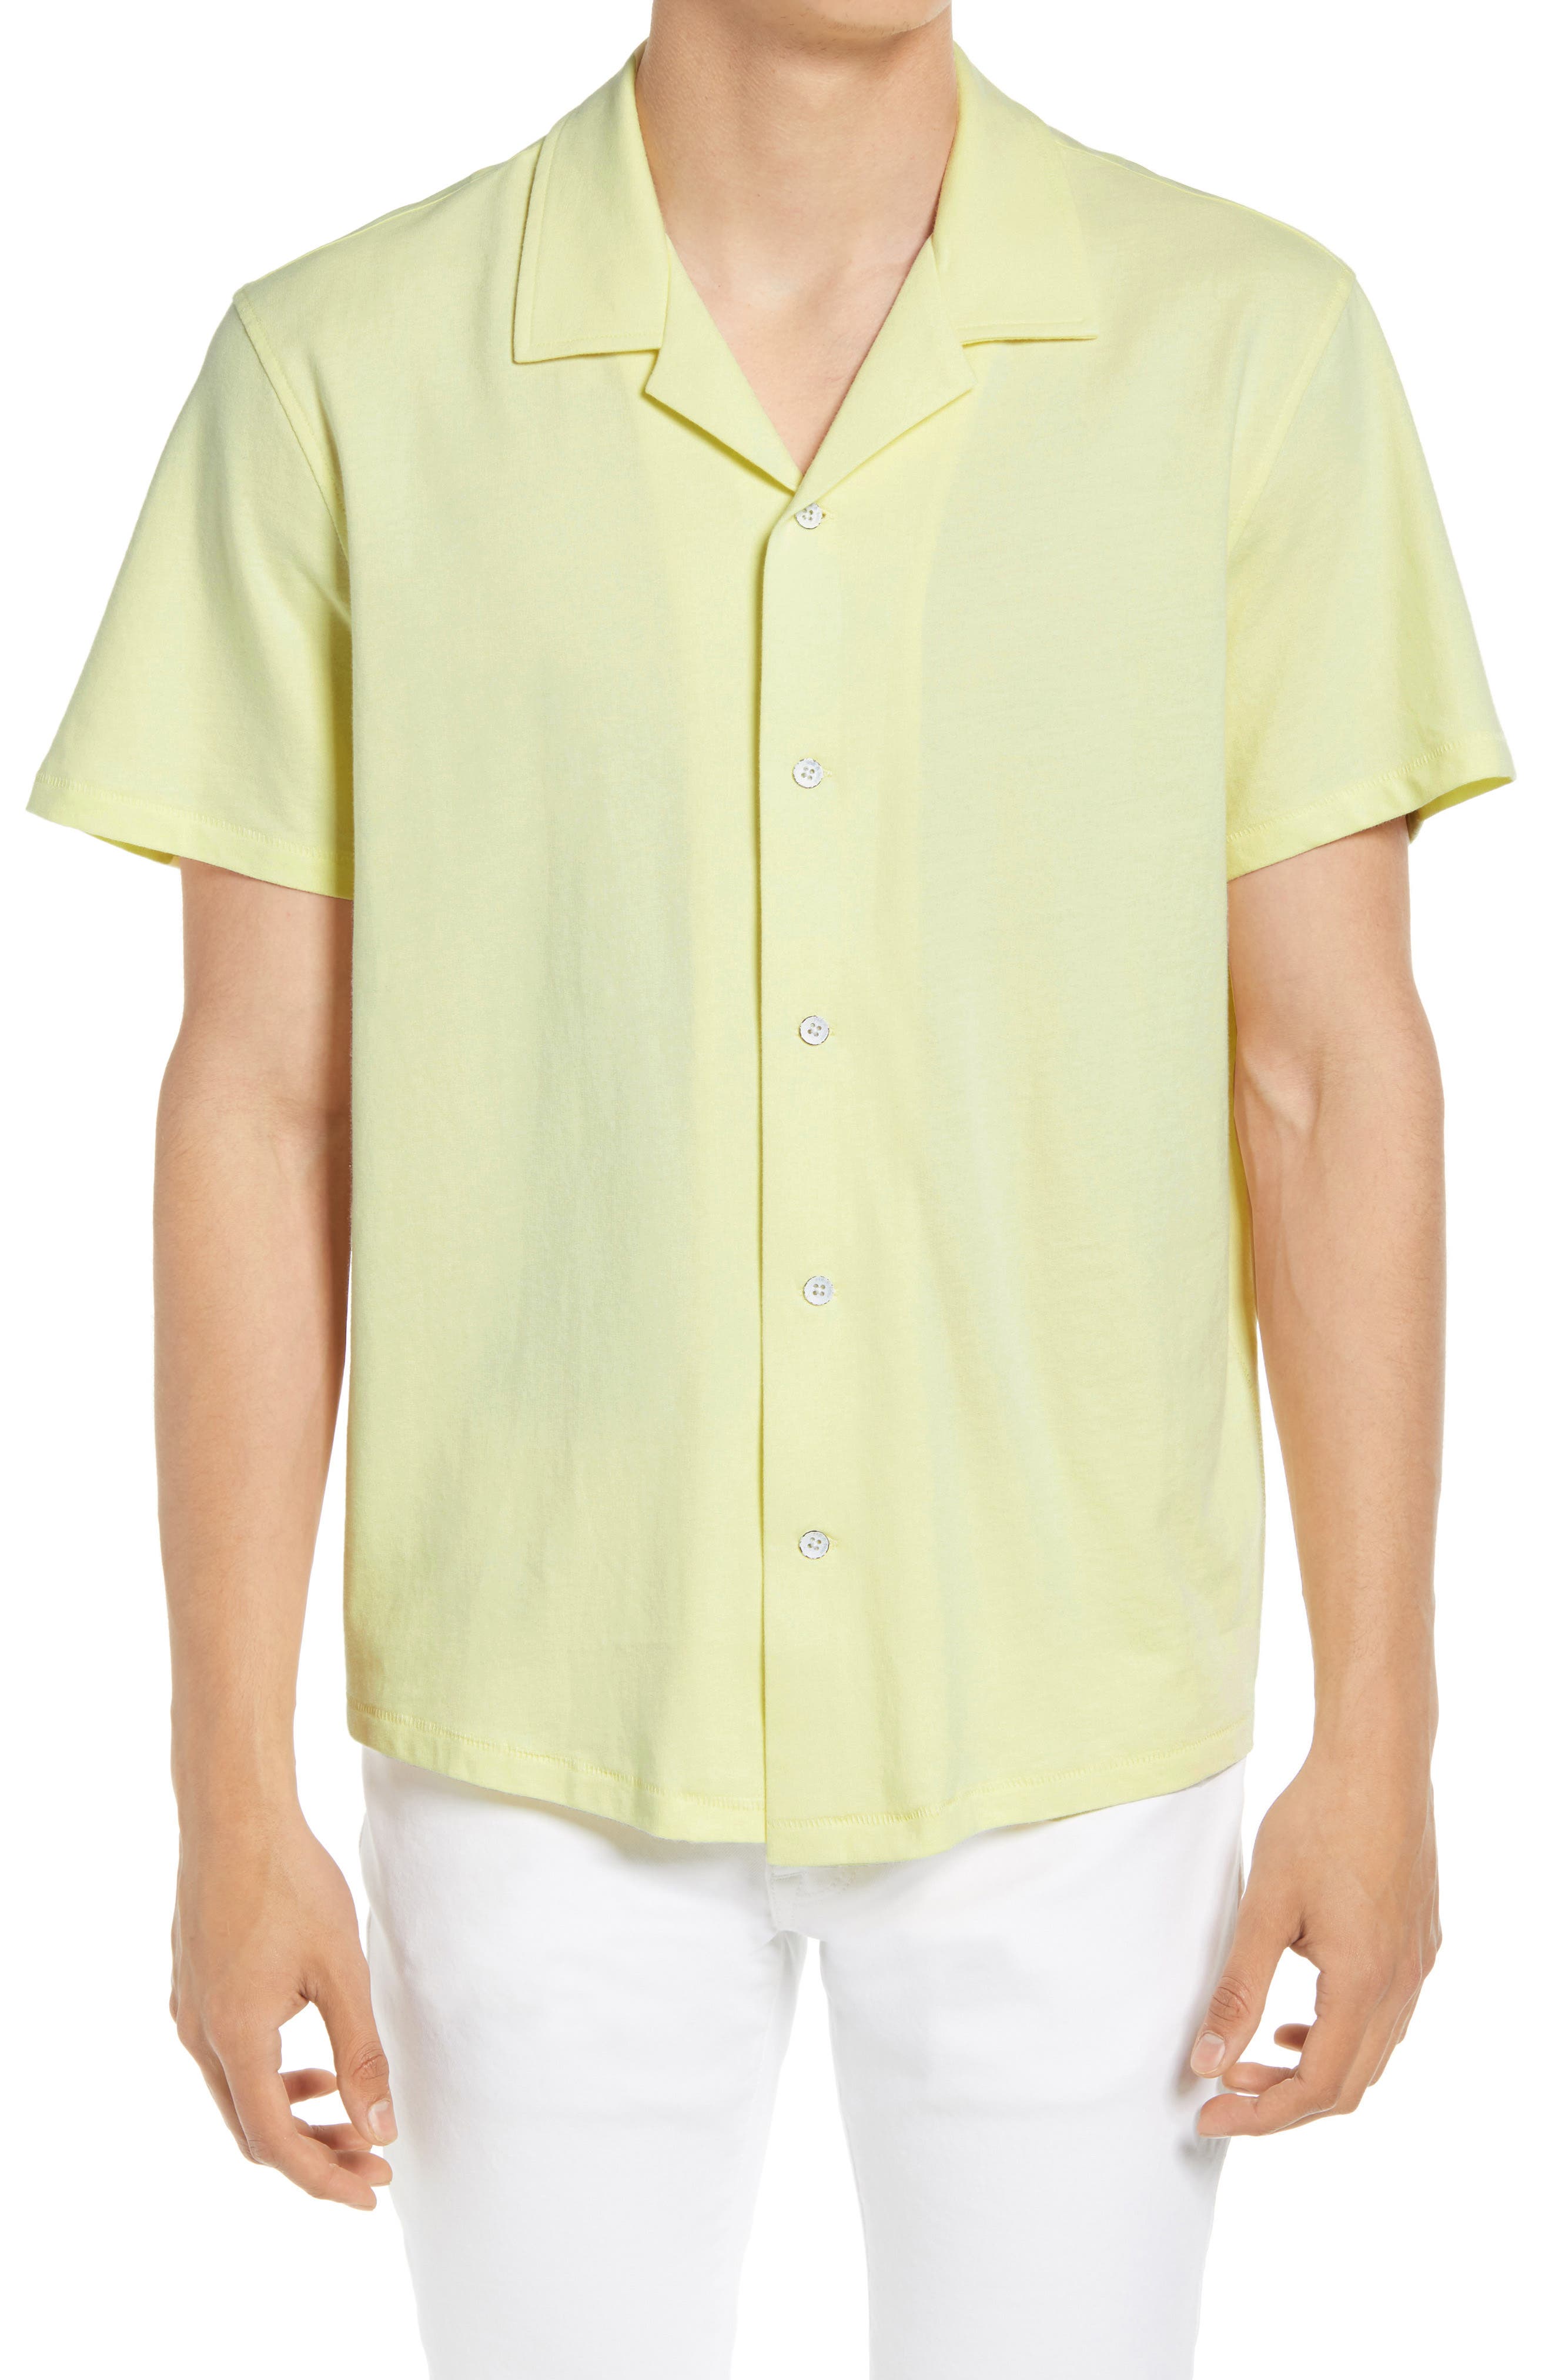 rag & bone Avery Knit Short Sleeve Button-Up Camp Shirt in Light Yellow at Nordstrom, Size X-Large